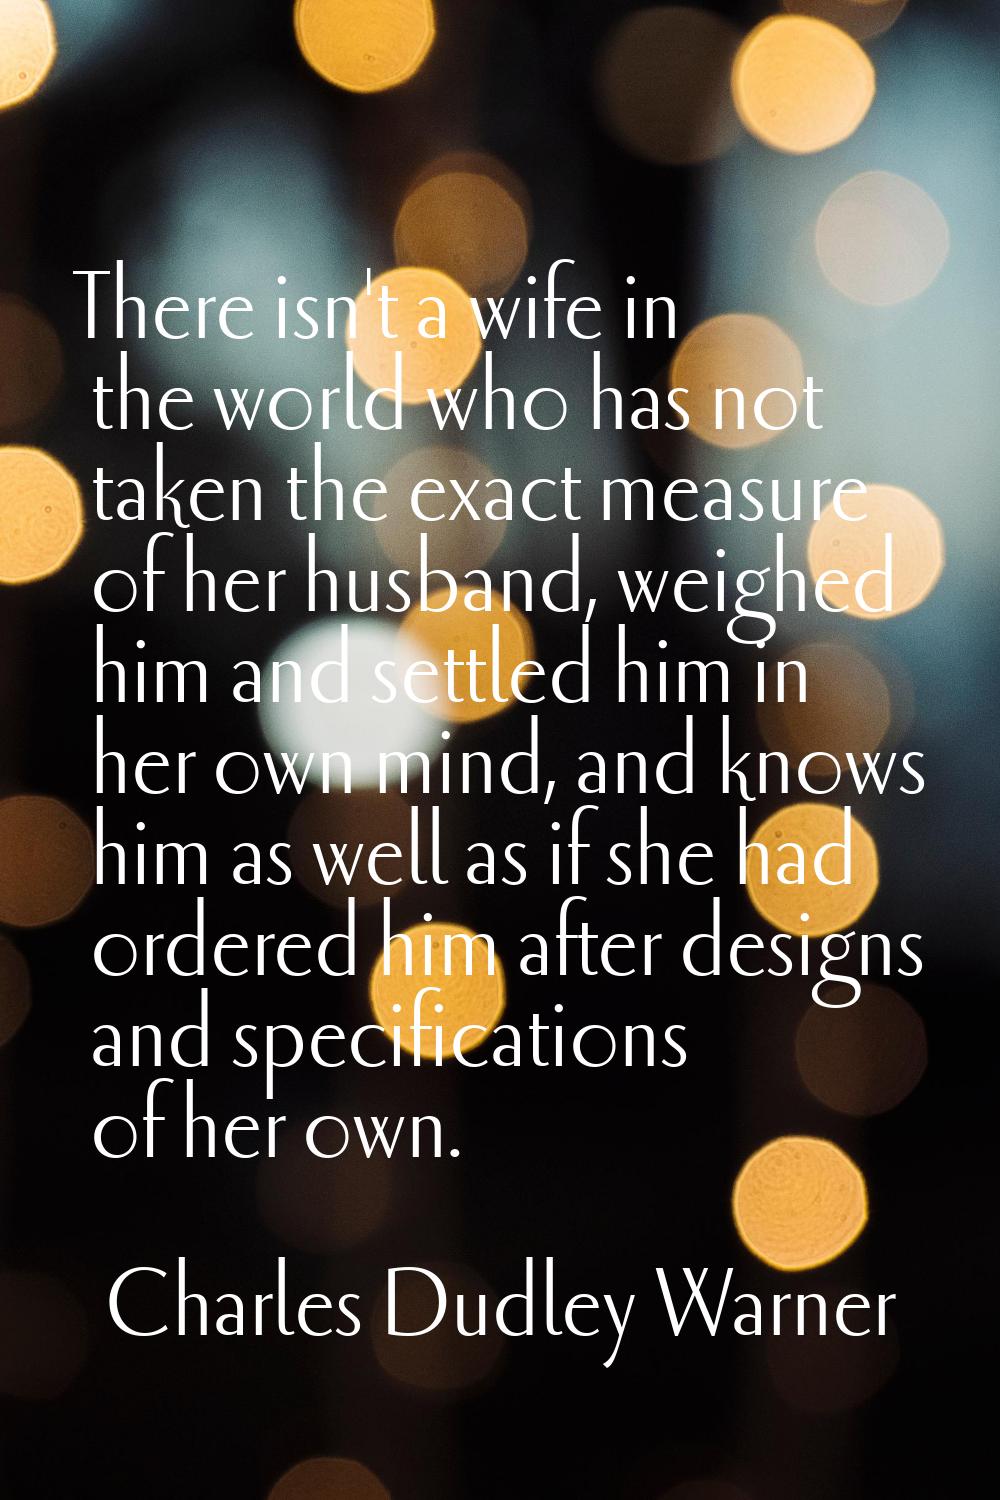 There isn't a wife in the world who has not taken the exact measure of her husband, weighed him and